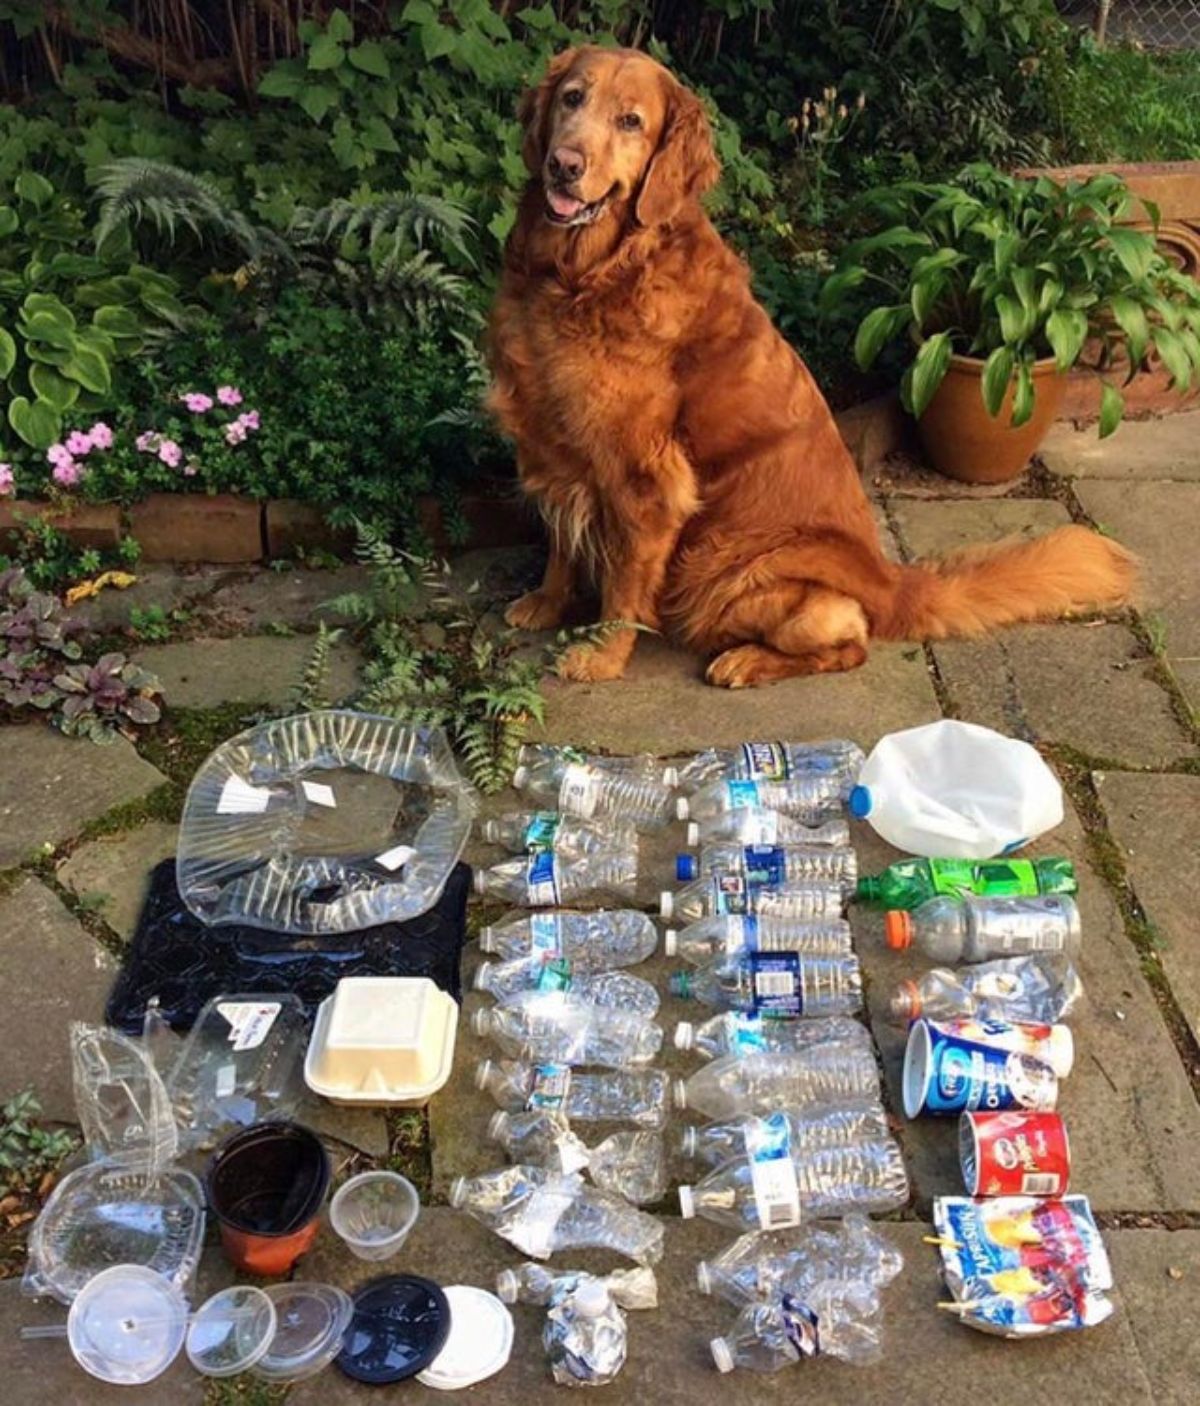 golden retriever sitting in front of a pile of plastic trash on the ground